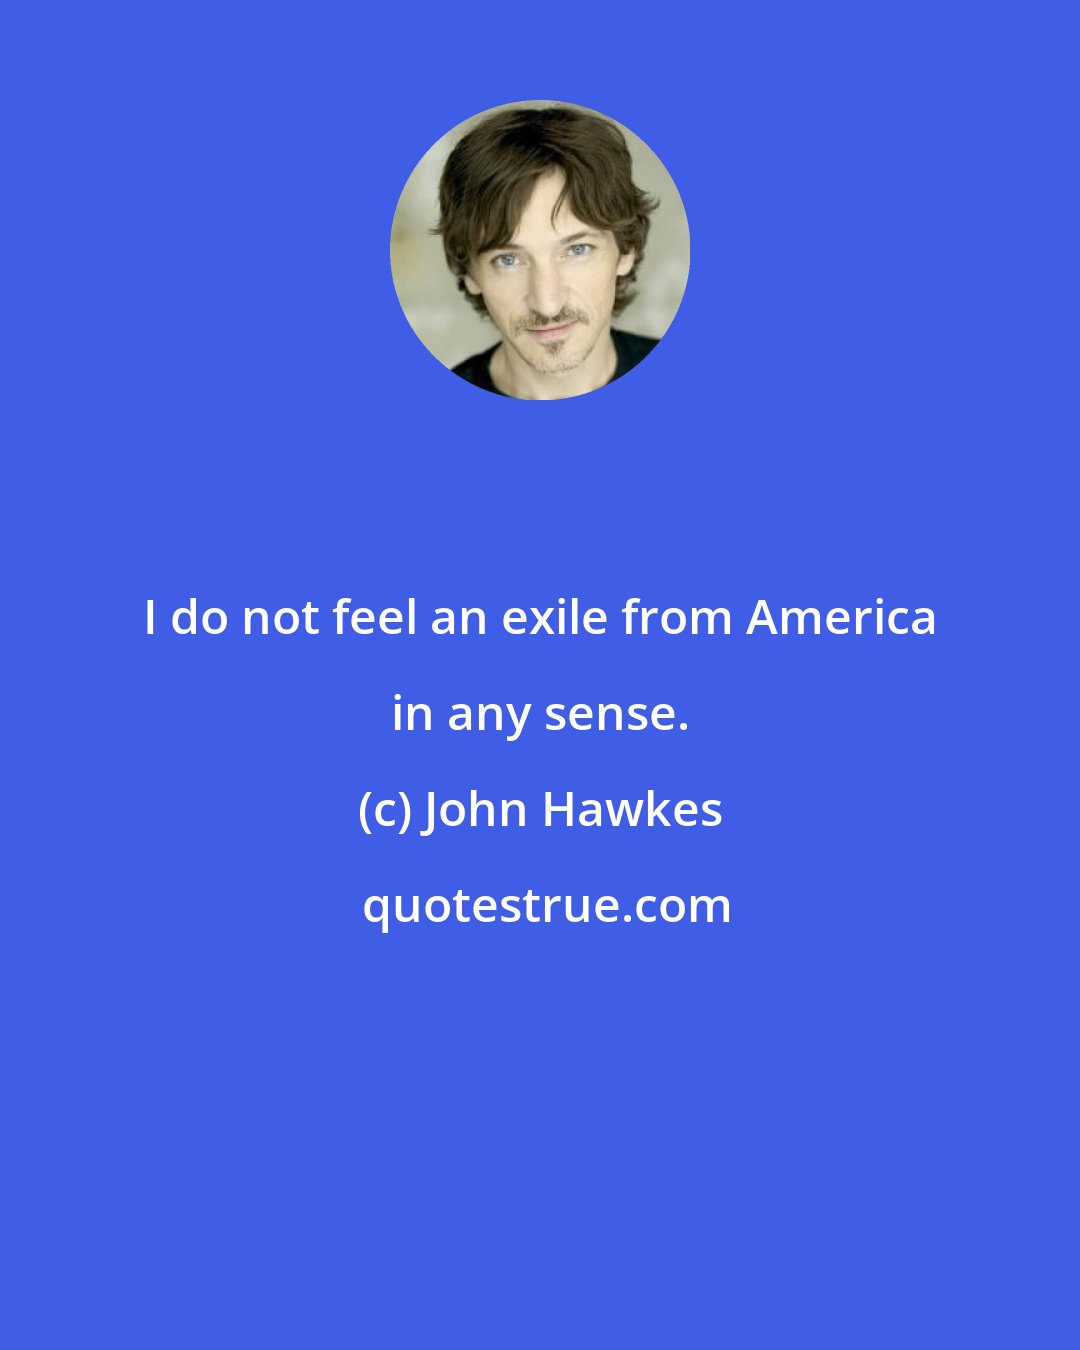 John Hawkes: I do not feel an exile from America in any sense.